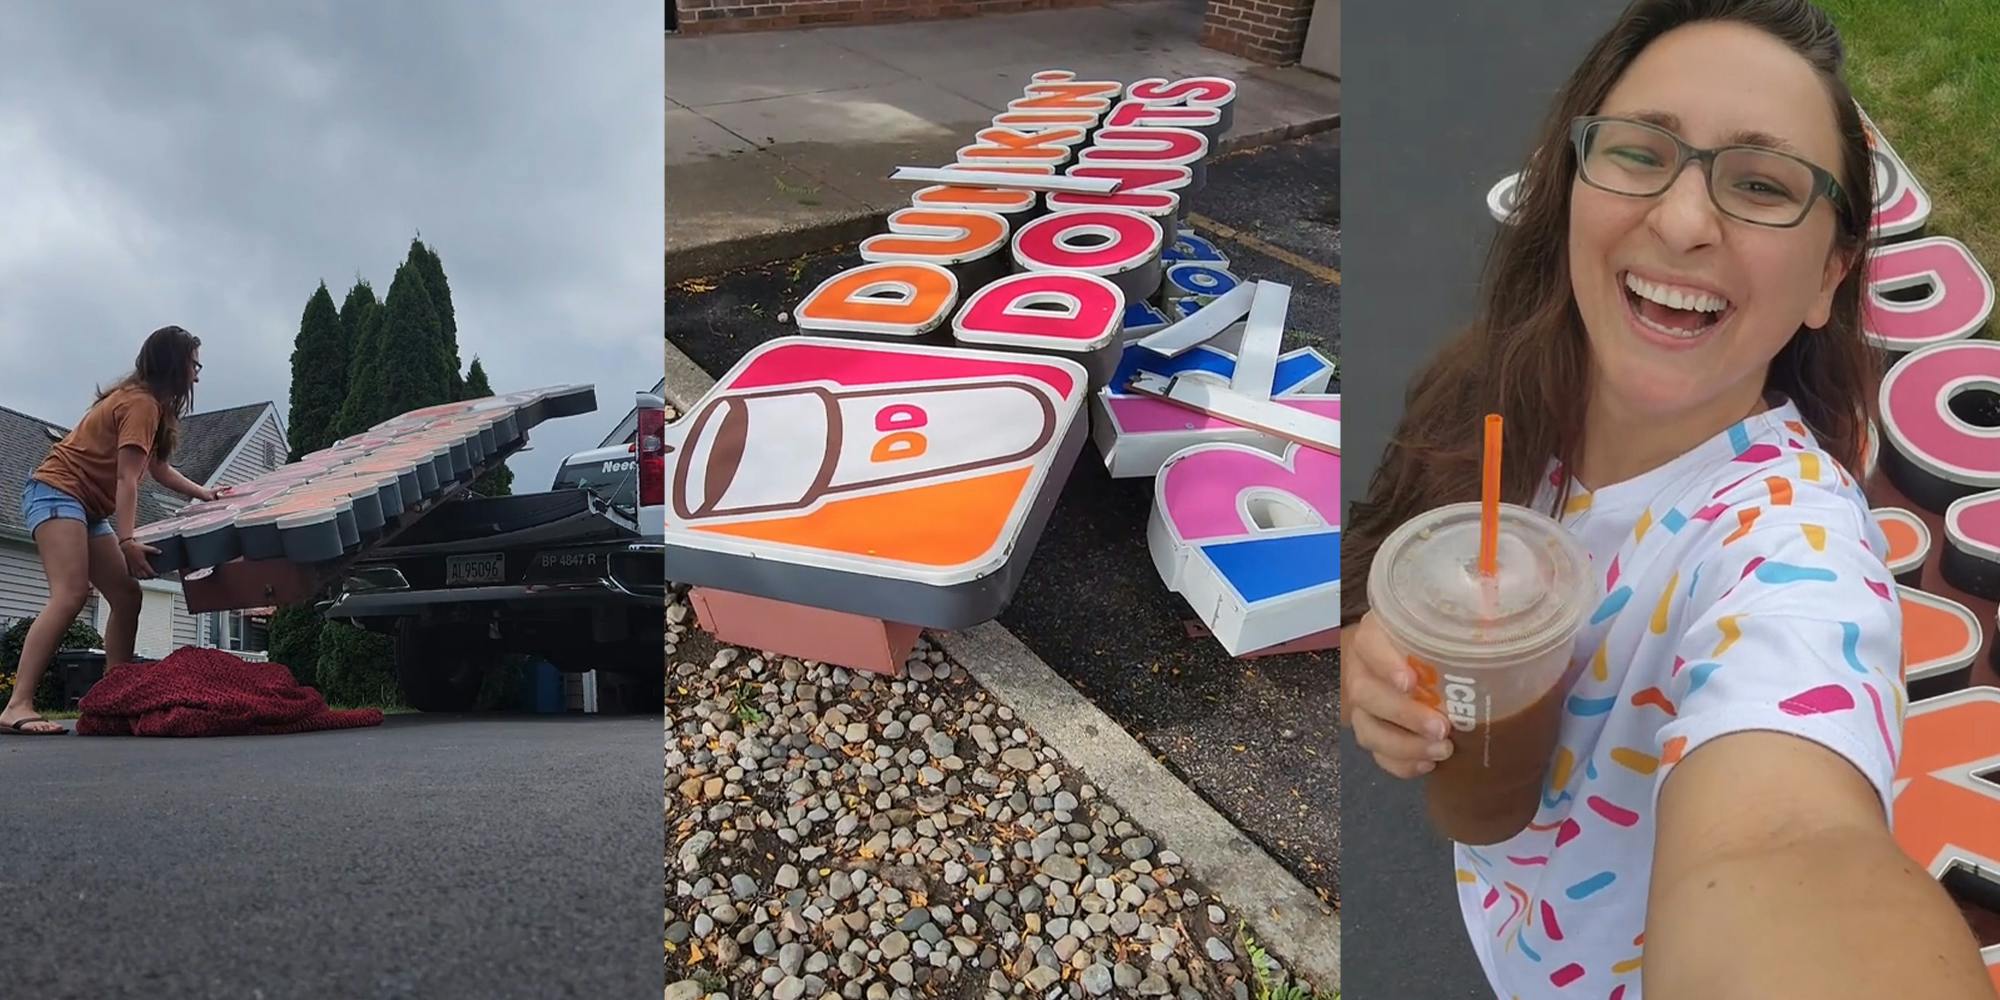 Customer discovers discarded 10-foot Dunkin' Donuts sign. They let her take it home